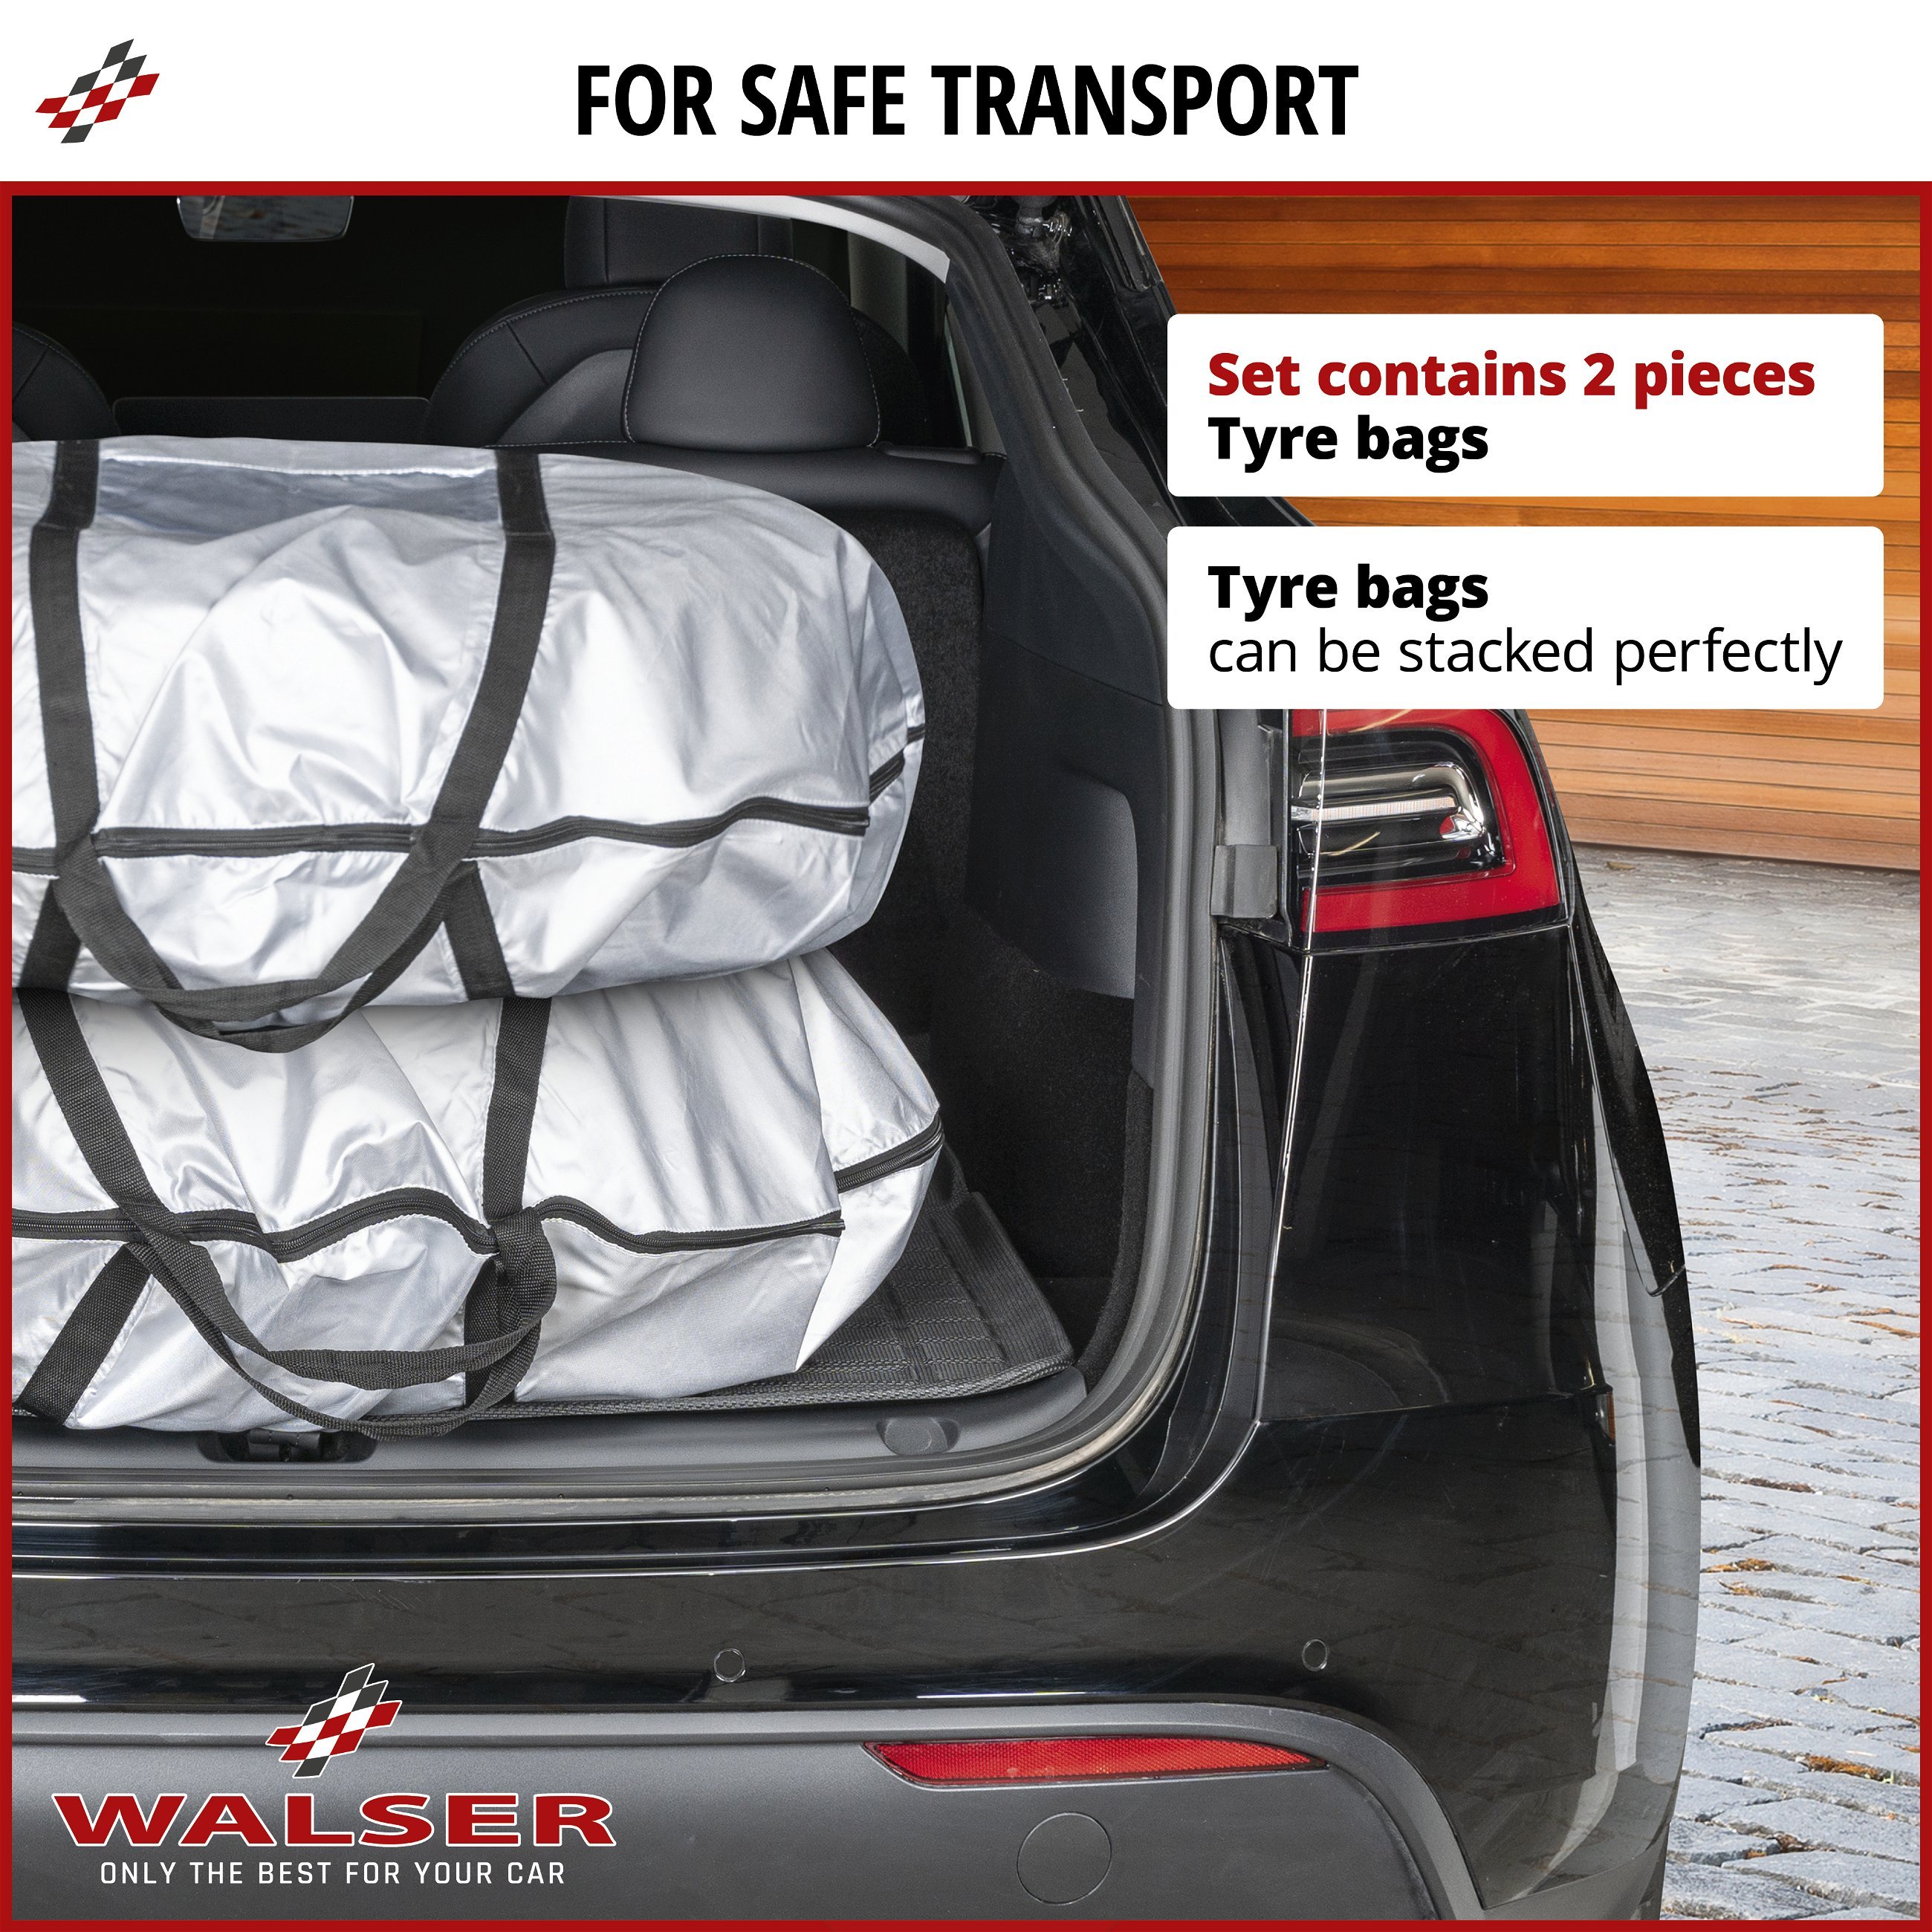 Tire storage Bag size XL, tyre bag 15-16 inch tyres silver